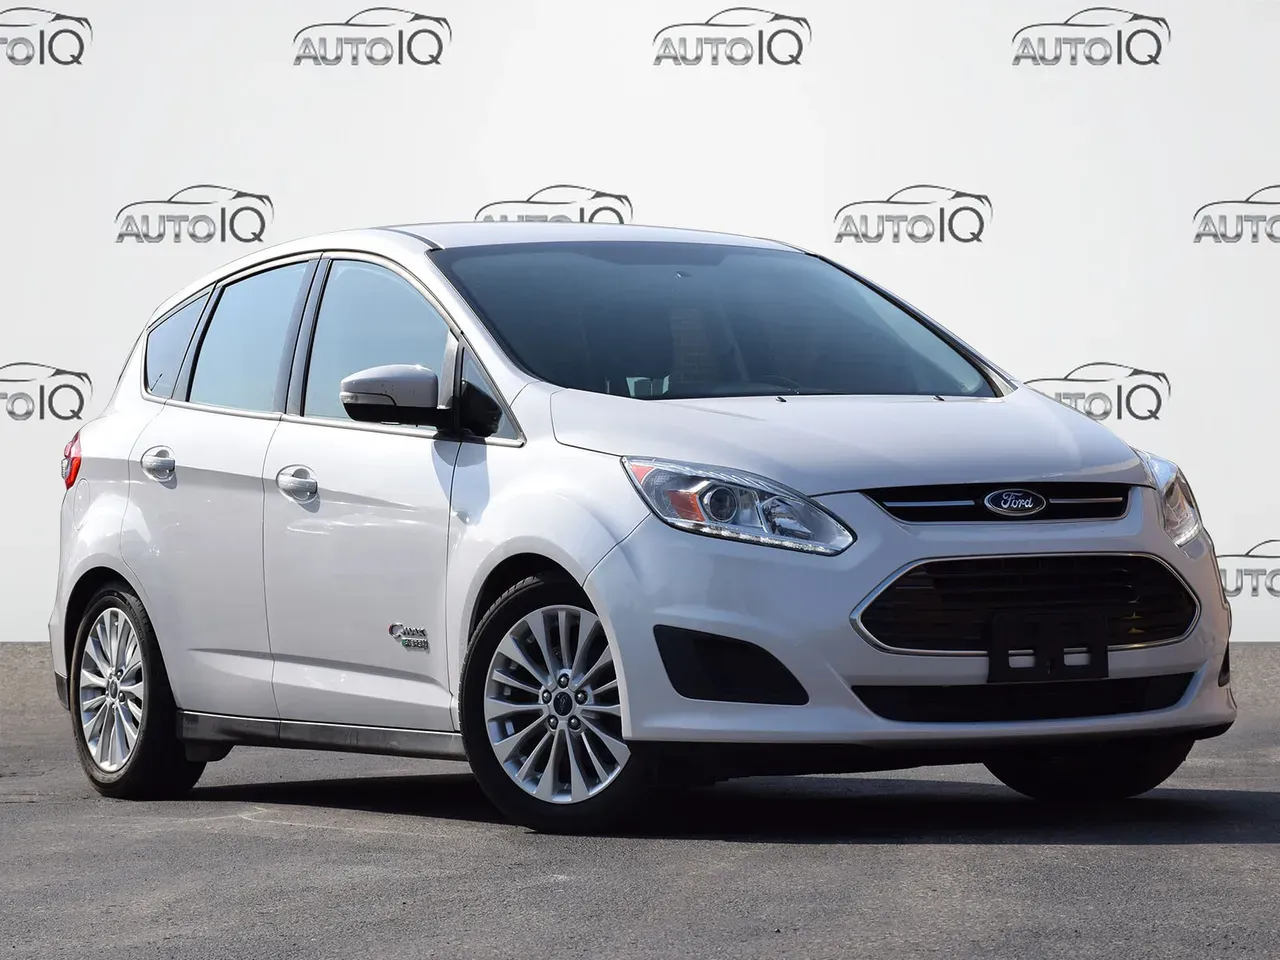 Used Ford C Max Energi For Sale In Cambridge Heyauto